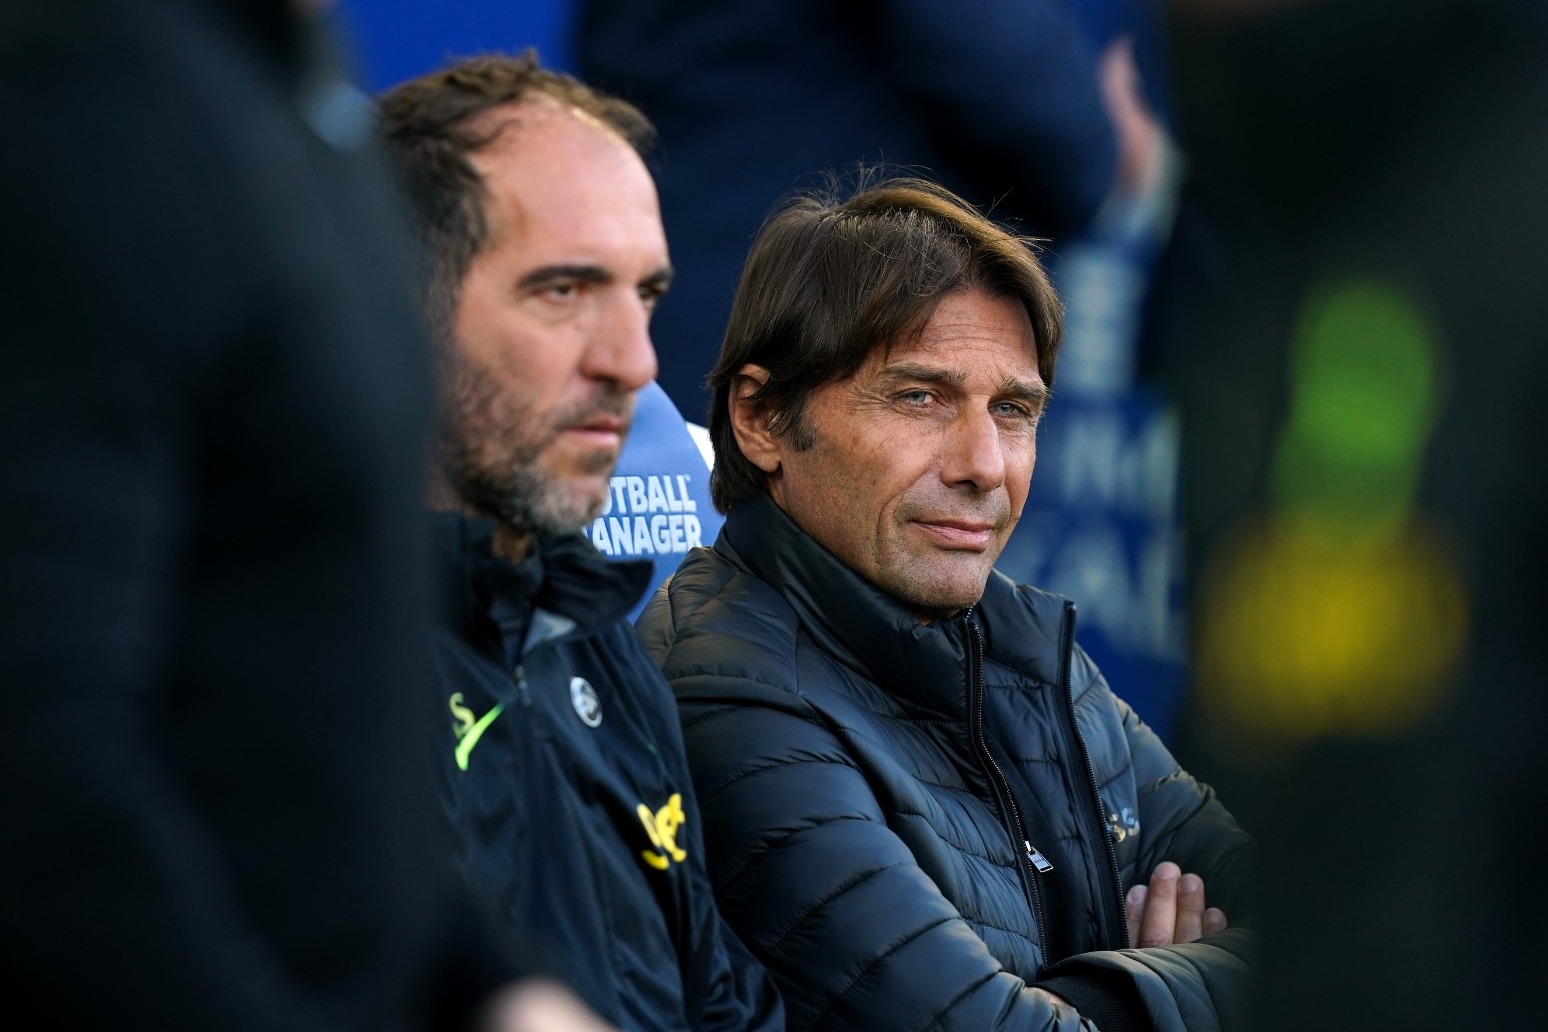 Antonio Conte excited to test Spurs side against football ‘monster’ Man Utd 